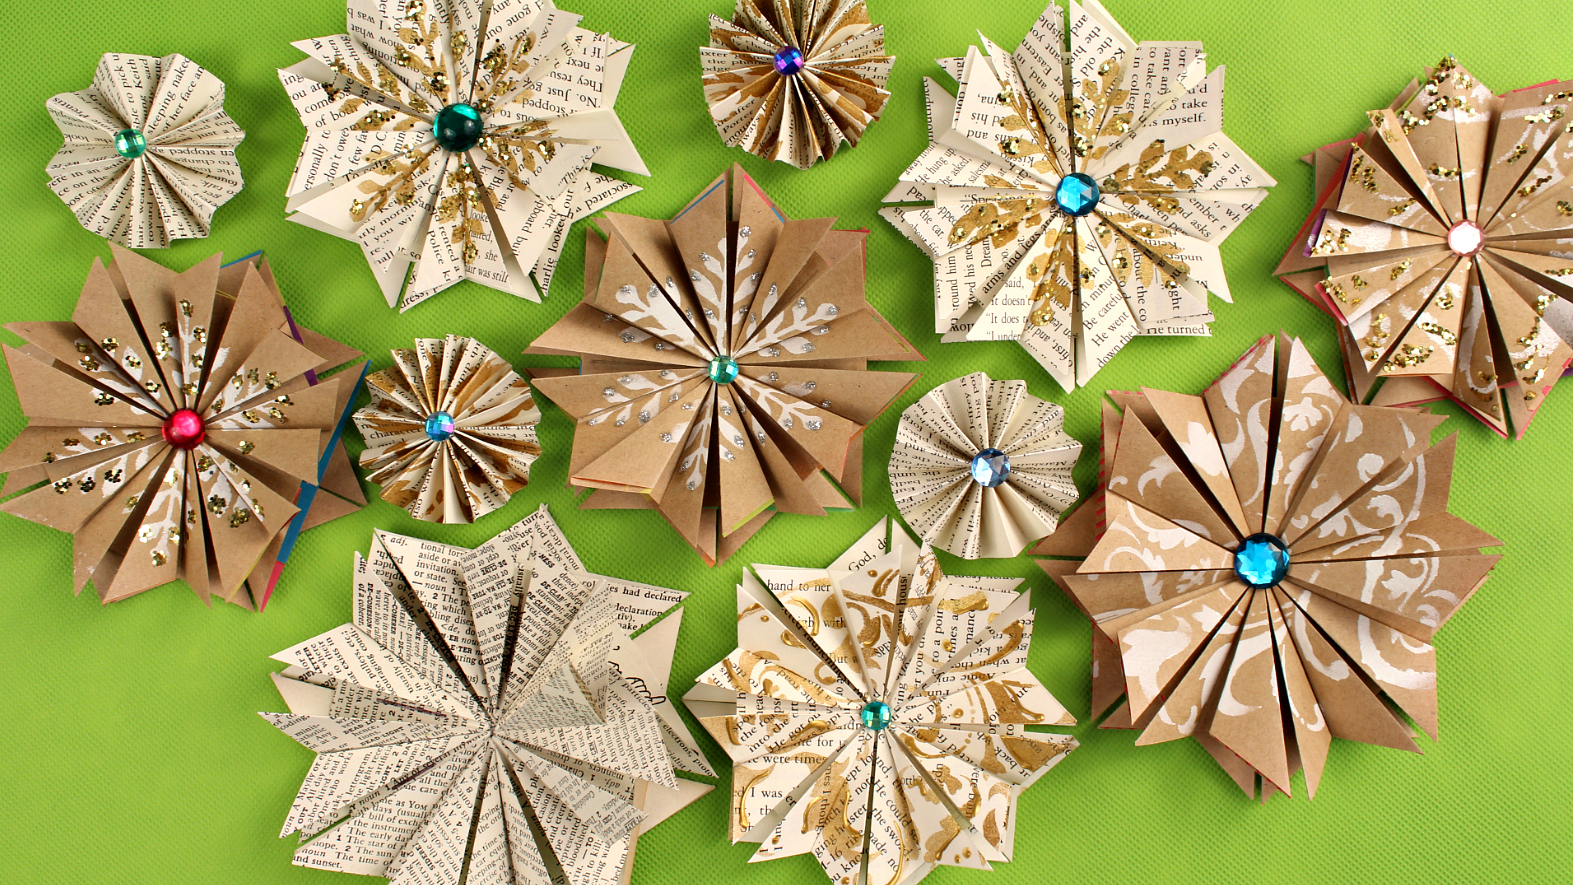 Origami Star How To Make Mark Montano Magical Origami Star Ornaments